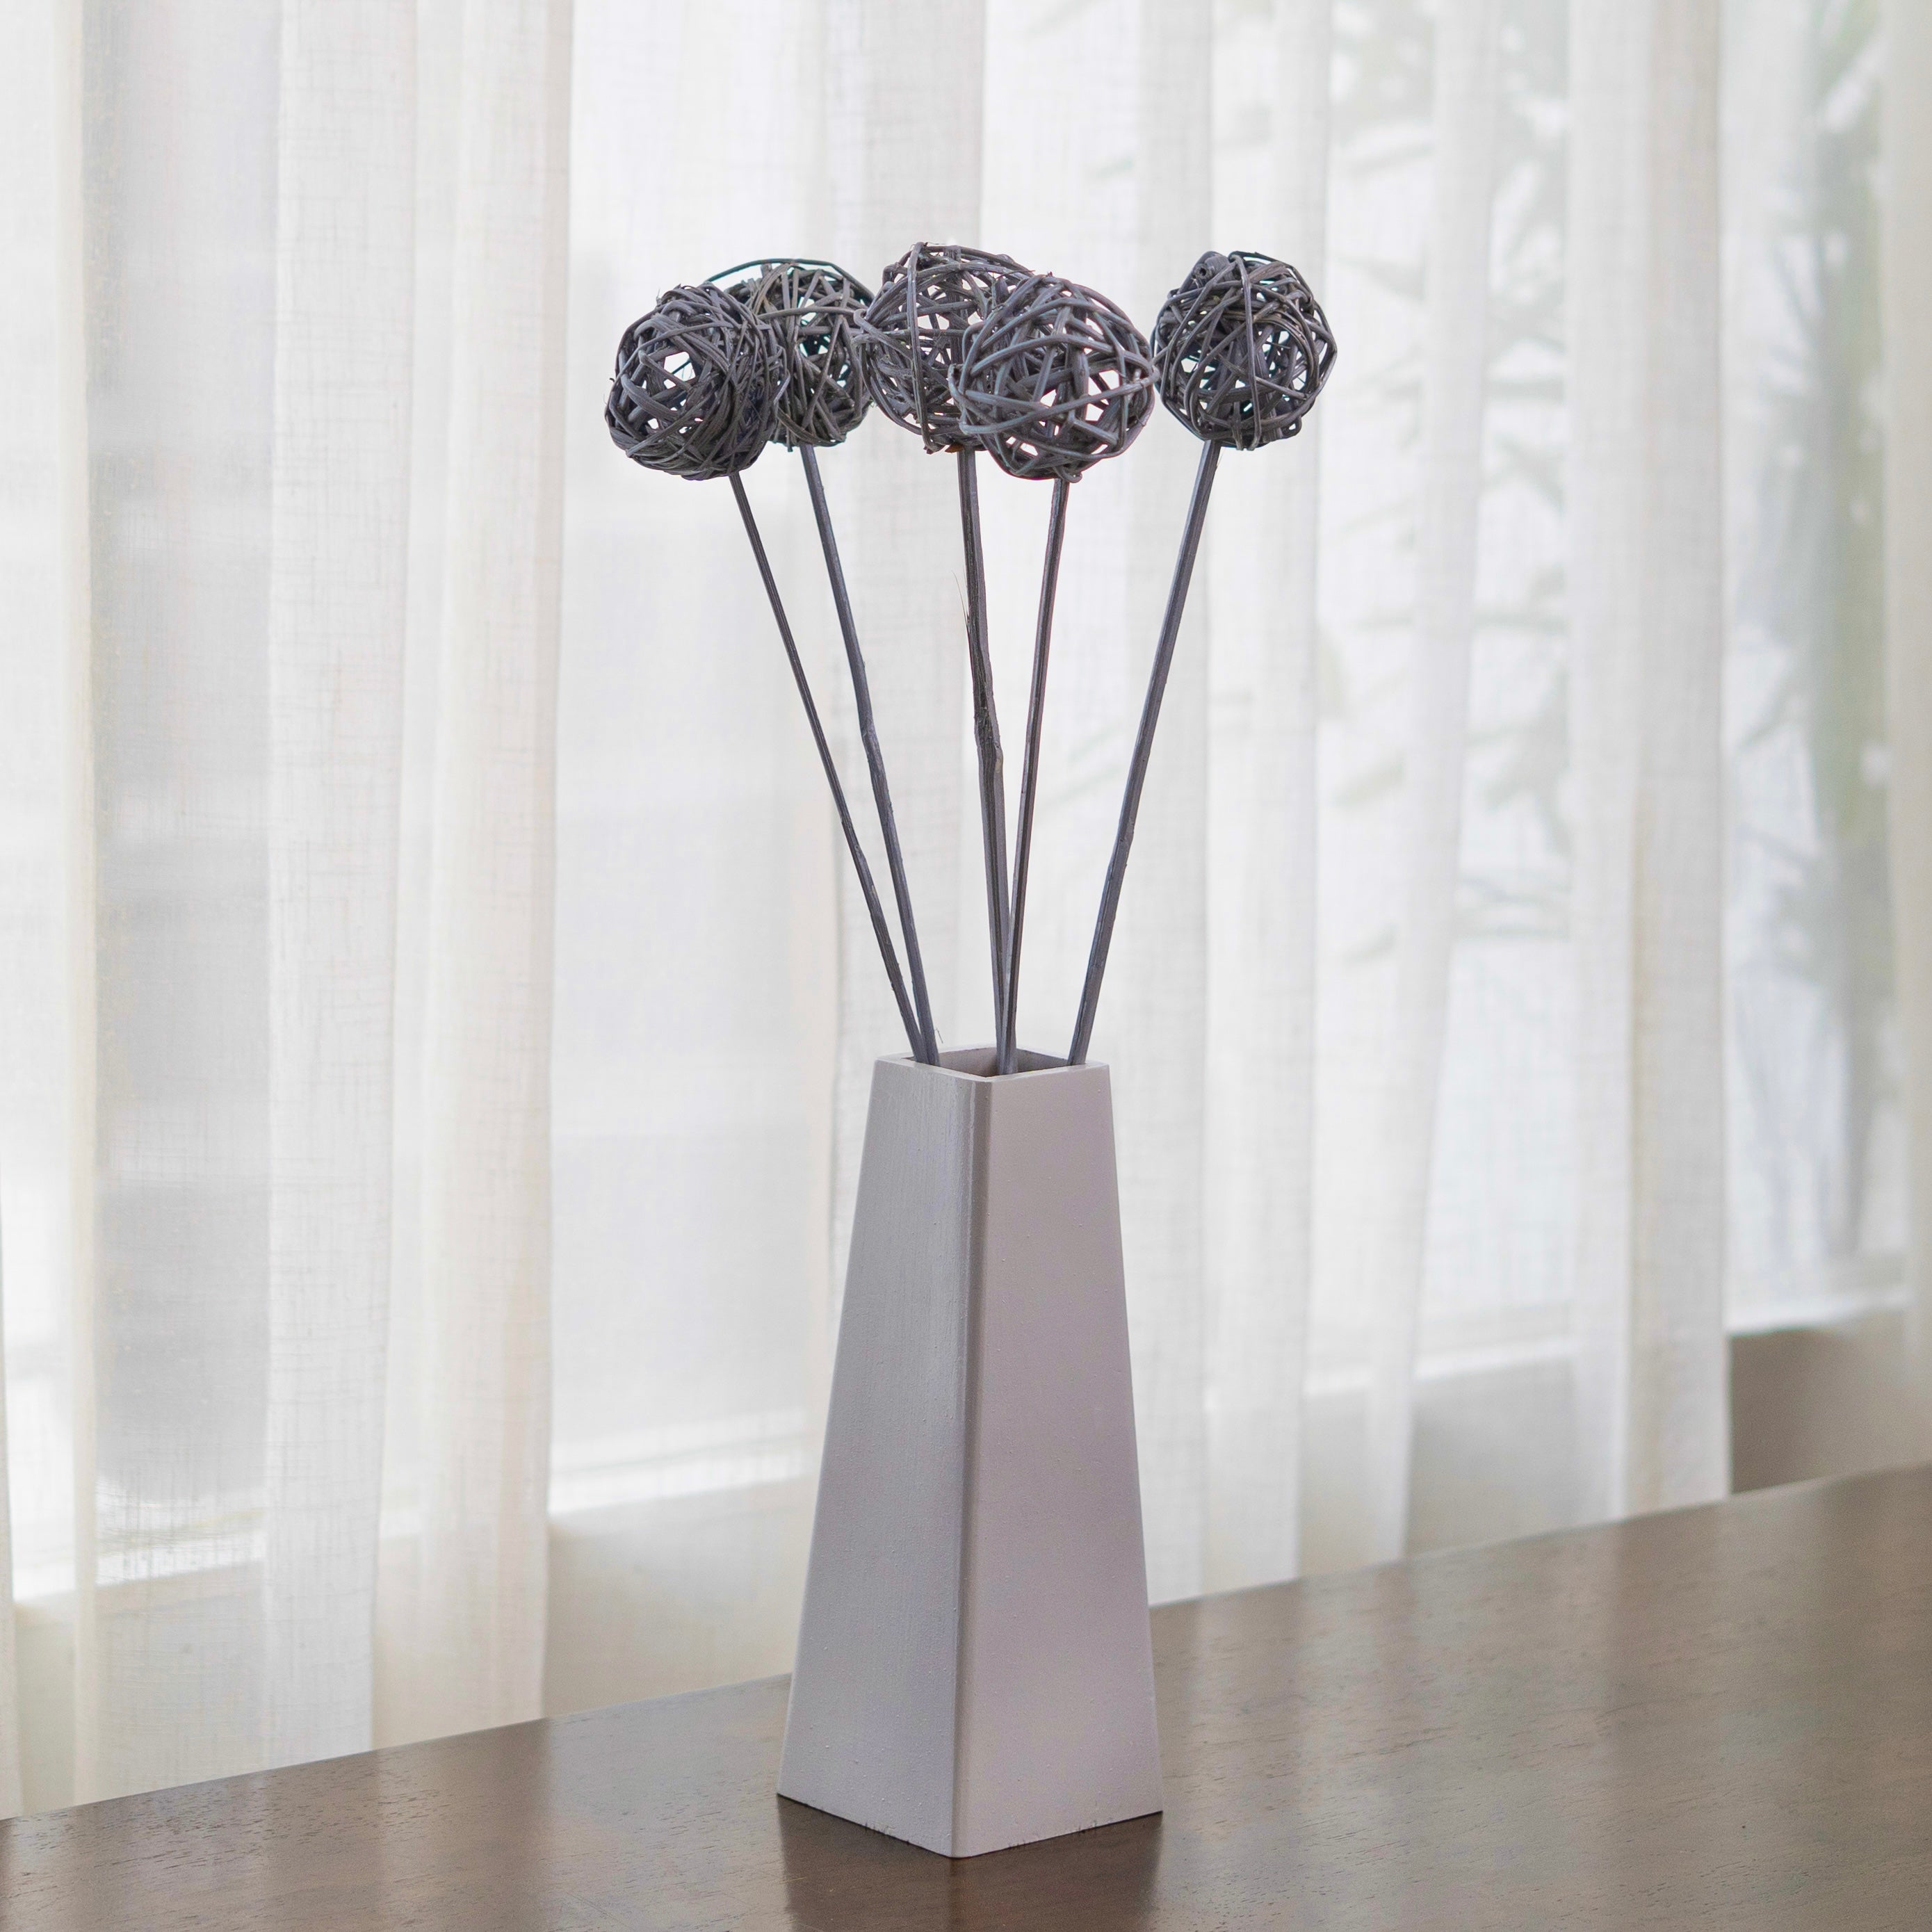 Dried wood ball stems set of 5 in grey